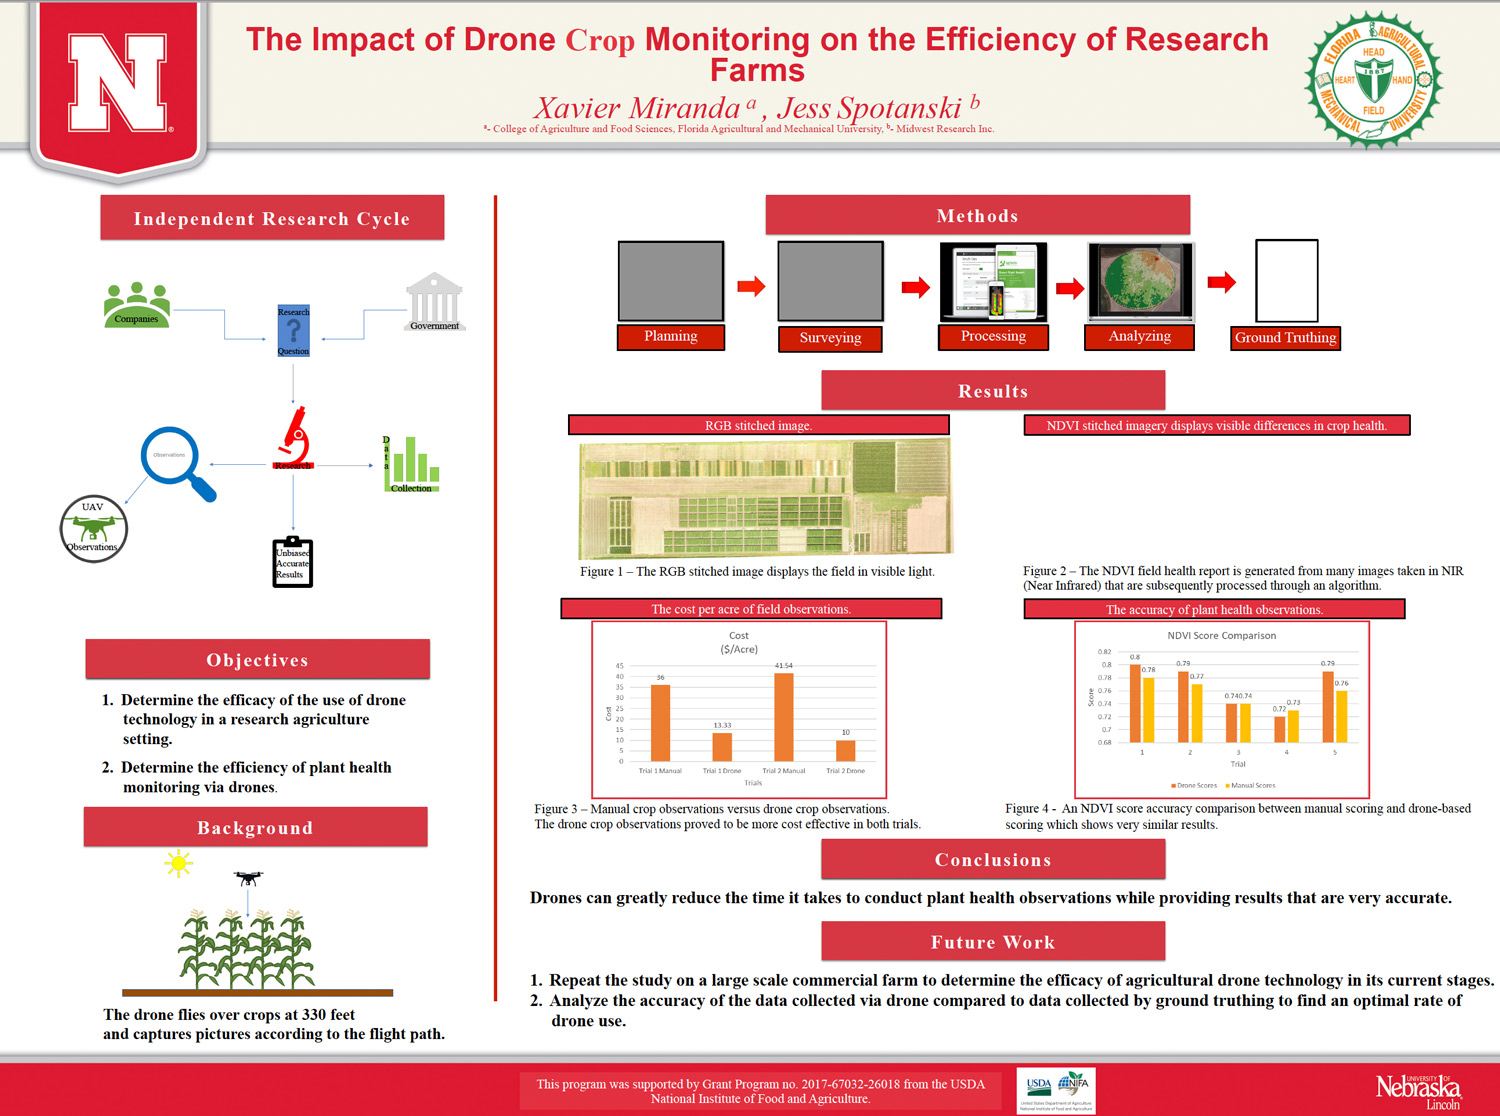 The Impact of Drone Crop Monitoring on the Efficiency of Research Farms poster